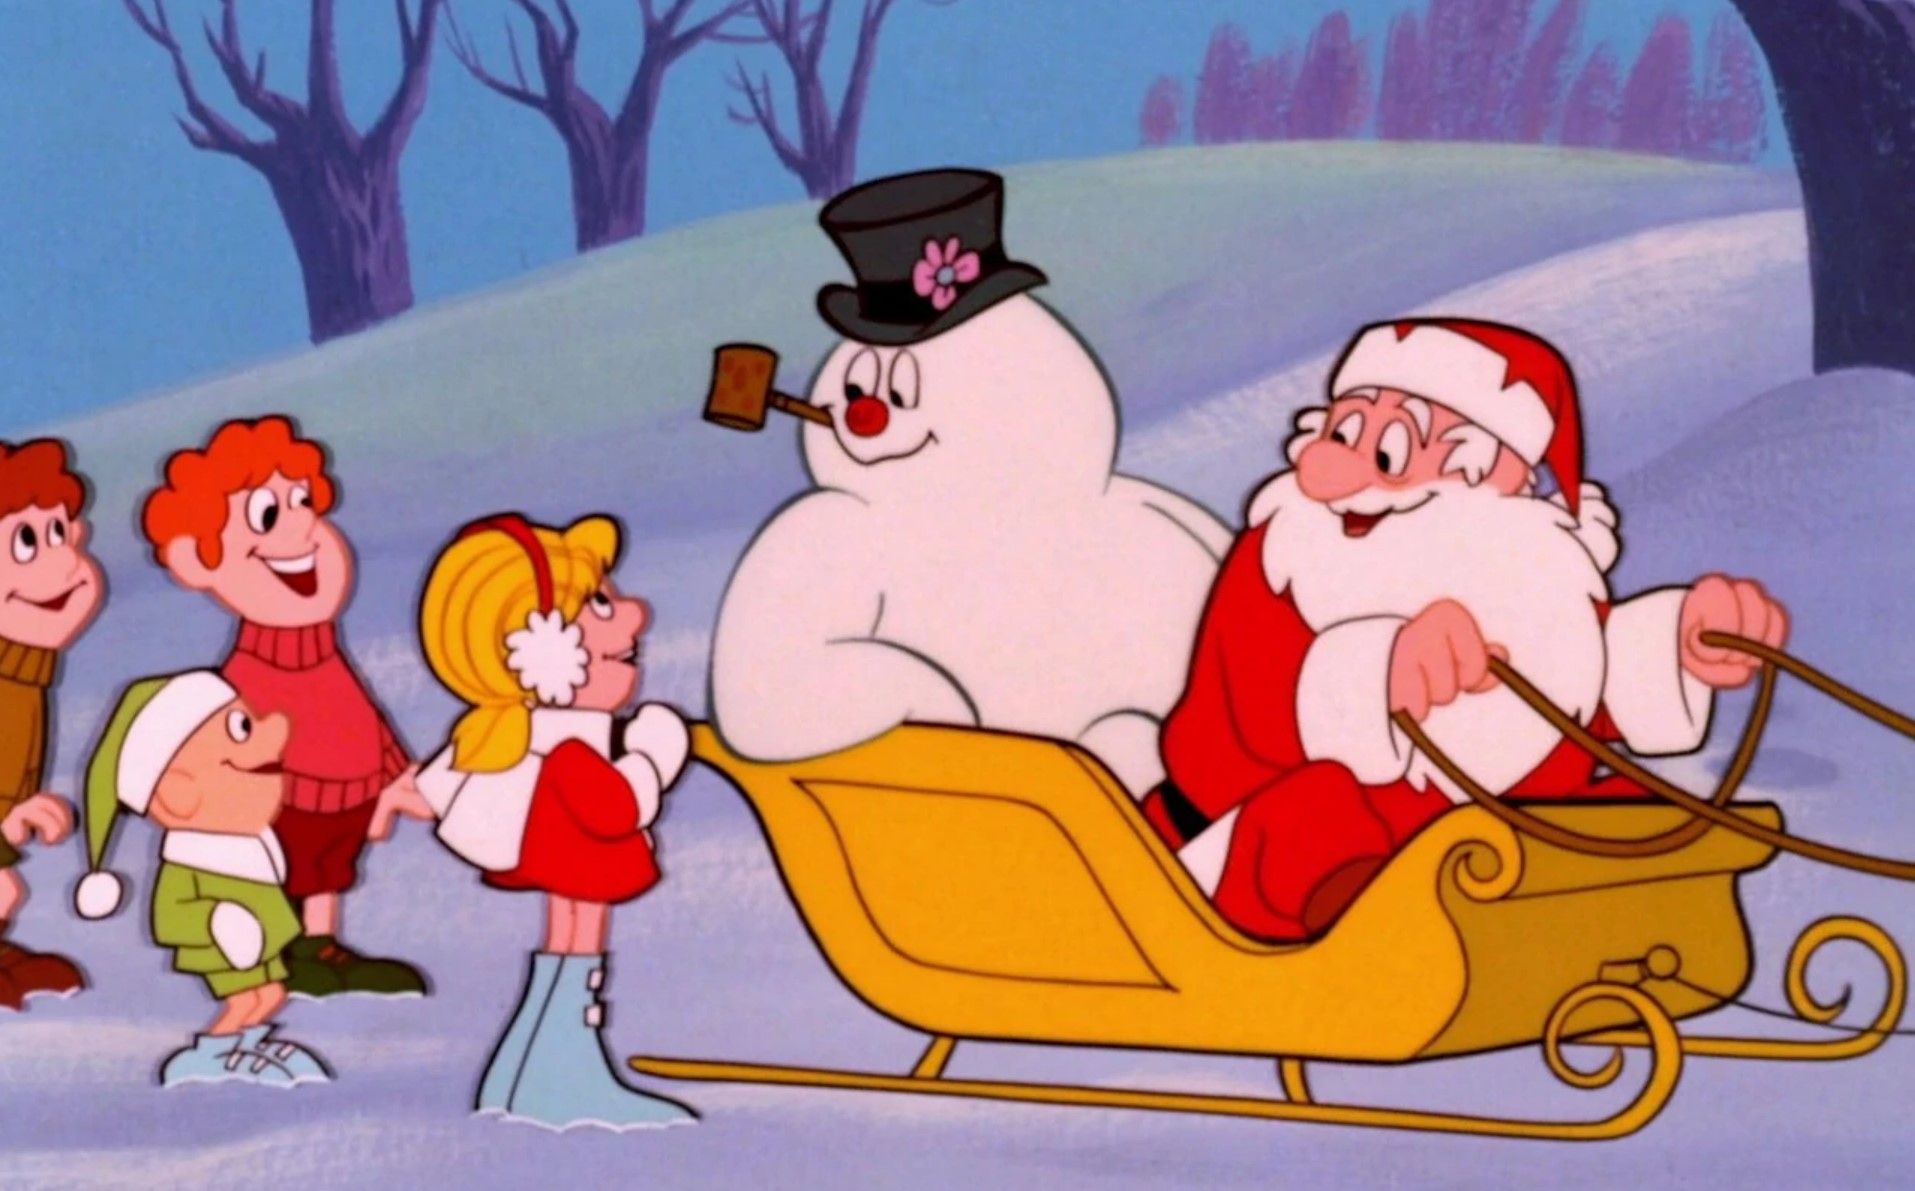 scene from Frosty the Snowman with Frosty in Santa's sleigh with Santa